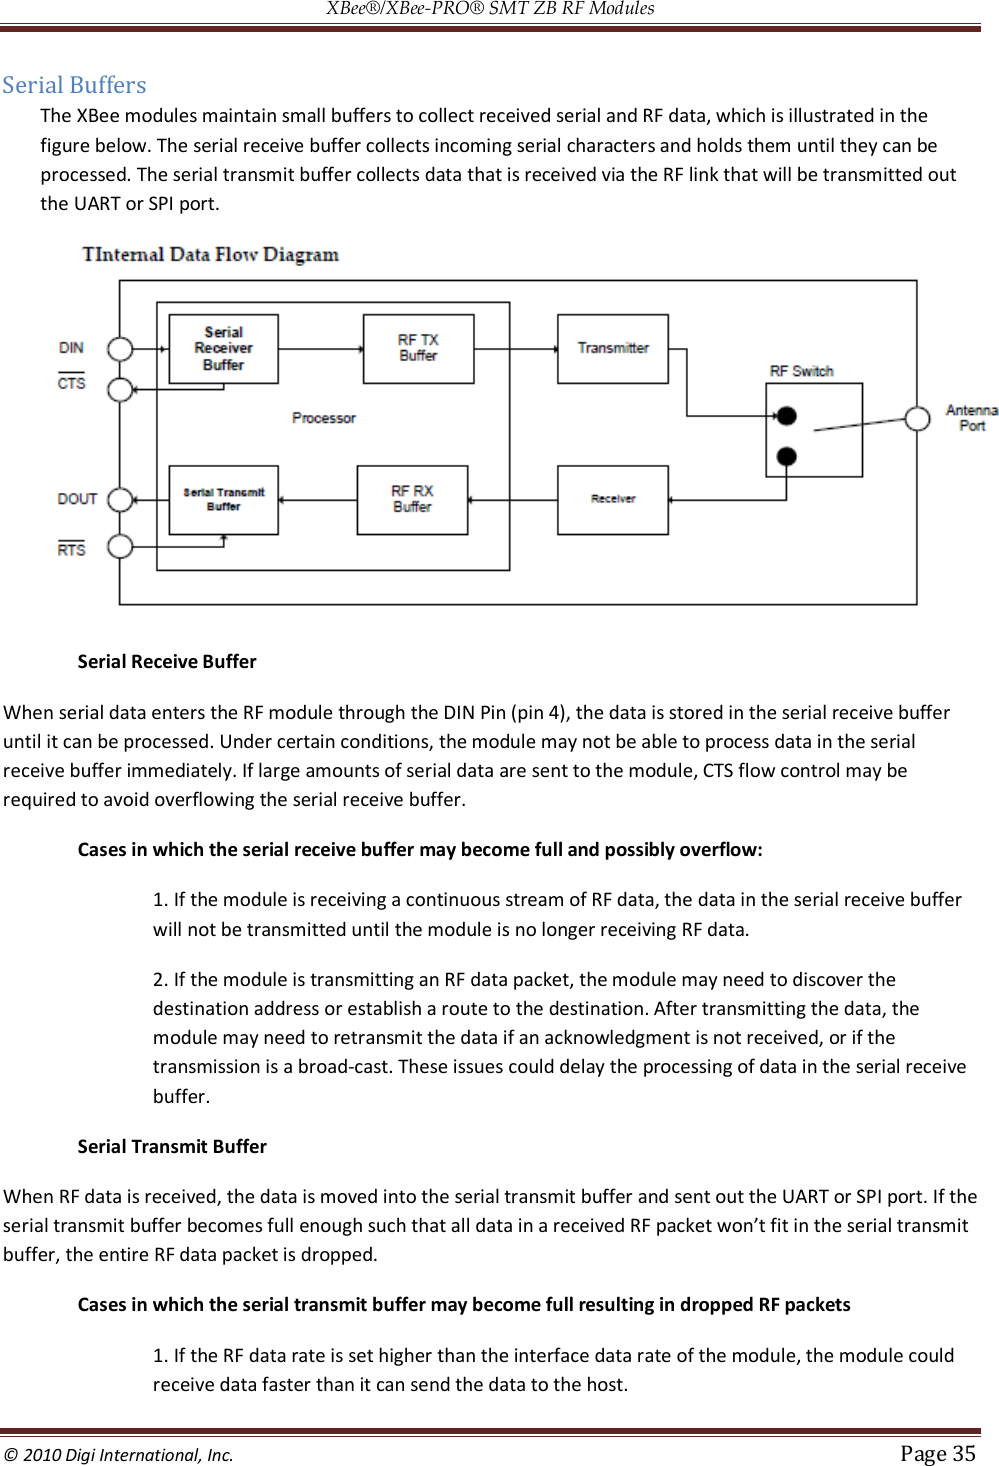 XBee®/XBee‐PRO® SMT ZB RF Modules  © 2010 Digi International, Inc.   Page 35  Serial Buffers The XBee modules maintain small buffers to collect received serial and RF data, which is illustrated in the figure below. The serial receive buffer collects incoming serial characters and holds them until they can be processed. The serial transmit buffer collects data that is received via the RF link that will be transmitted out the UART or SPI port.  Serial Receive Buffer When serial data enters the RF module through the DIN Pin (pin 4), the data is stored in the serial receive buffer until it can be processed. Under certain conditions, the module may not be able to process data in the serial receive buffer immediately. If large amounts of serial data are sent to the module, CTS flow control may be required to avoid overflowing the serial receive buffer.  Cases in which the serial receive buffer may become full and possibly overflow:  1. If the module is receiving a continuous stream of RF data, the data in the serial receive buffer will not be transmitted until the module is no longer receiving RF data.  2. If the module is transmitting an RF data packet, the module may need to discover the destination address or establish a route to the destination. After transmitting the data, the module may need to retransmit the data if an acknowledgment is not received, or if the transmission is a broad-cast. These issues could delay the processing of data in the serial receive buffer. Serial Transmit Buffer When RF data is received, the data is moved into the serial transmit buffer and sent out the UART or SPI port. If the serial transmit buffer becomes full enough such that all data in a received RF packet won’t fit in the serial transmit buffer, the entire RF data packet is dropped.  Cases in which the serial transmit buffer may become full resulting in dropped RF packets  1. If the RF data rate is set higher than the interface data rate of the module, the module could receive data faster than it can send the data to the host.  